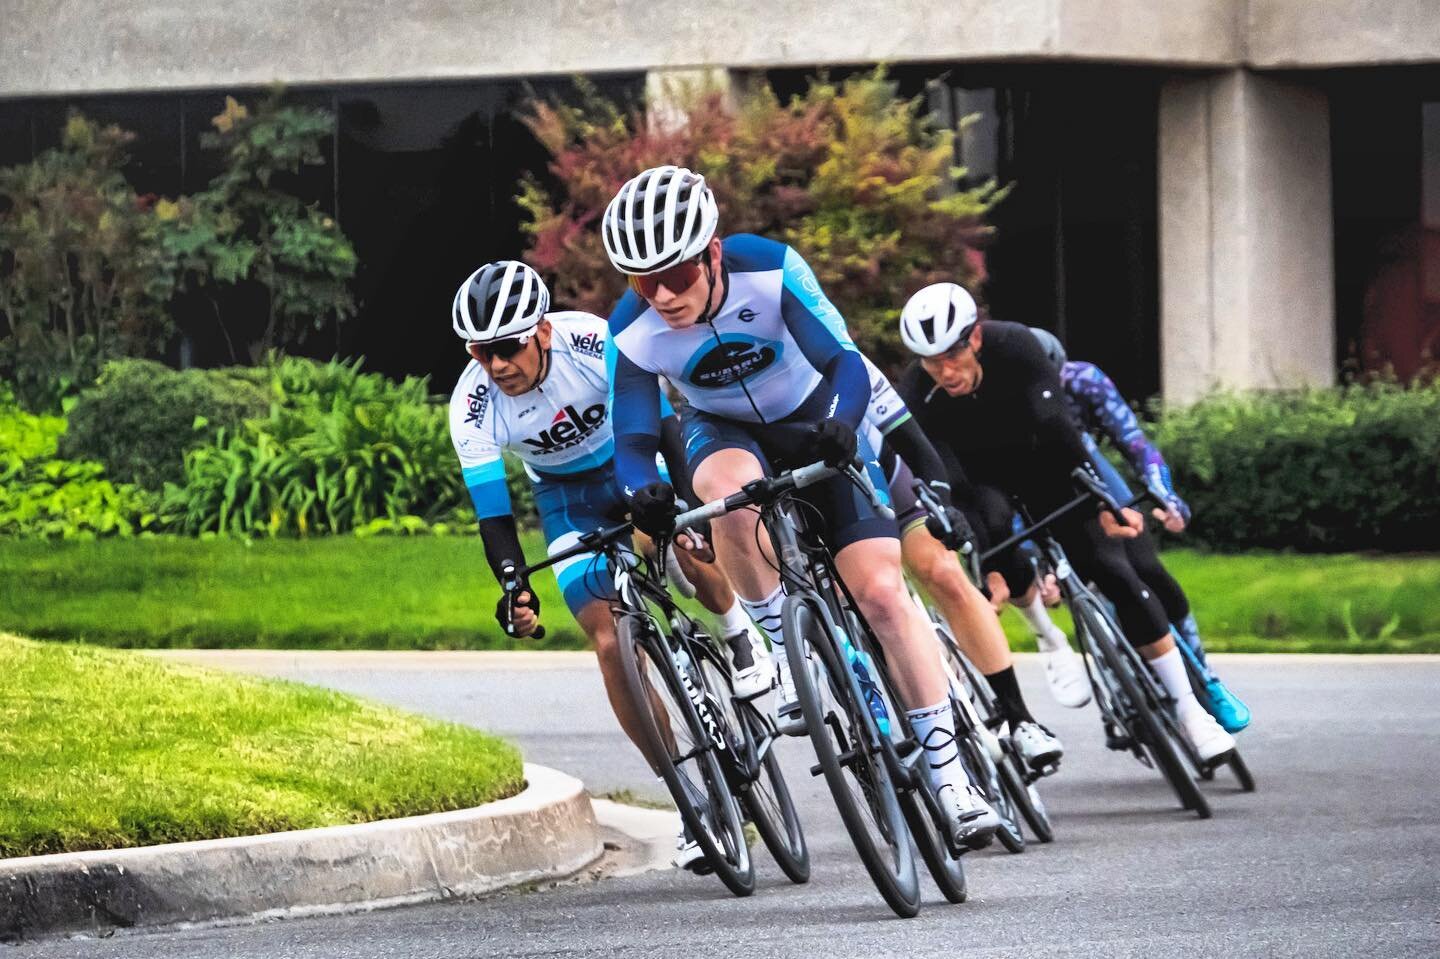 @firewyer looking strong! He&rsquo;s on his way to his Cat 1 upgrade after this weekends performance at the Tour of Murrieta, everyone look out! (Yes, the picture of him is from the Camarillo Crit Practice, and yes, he looks good in our colors!) 

An